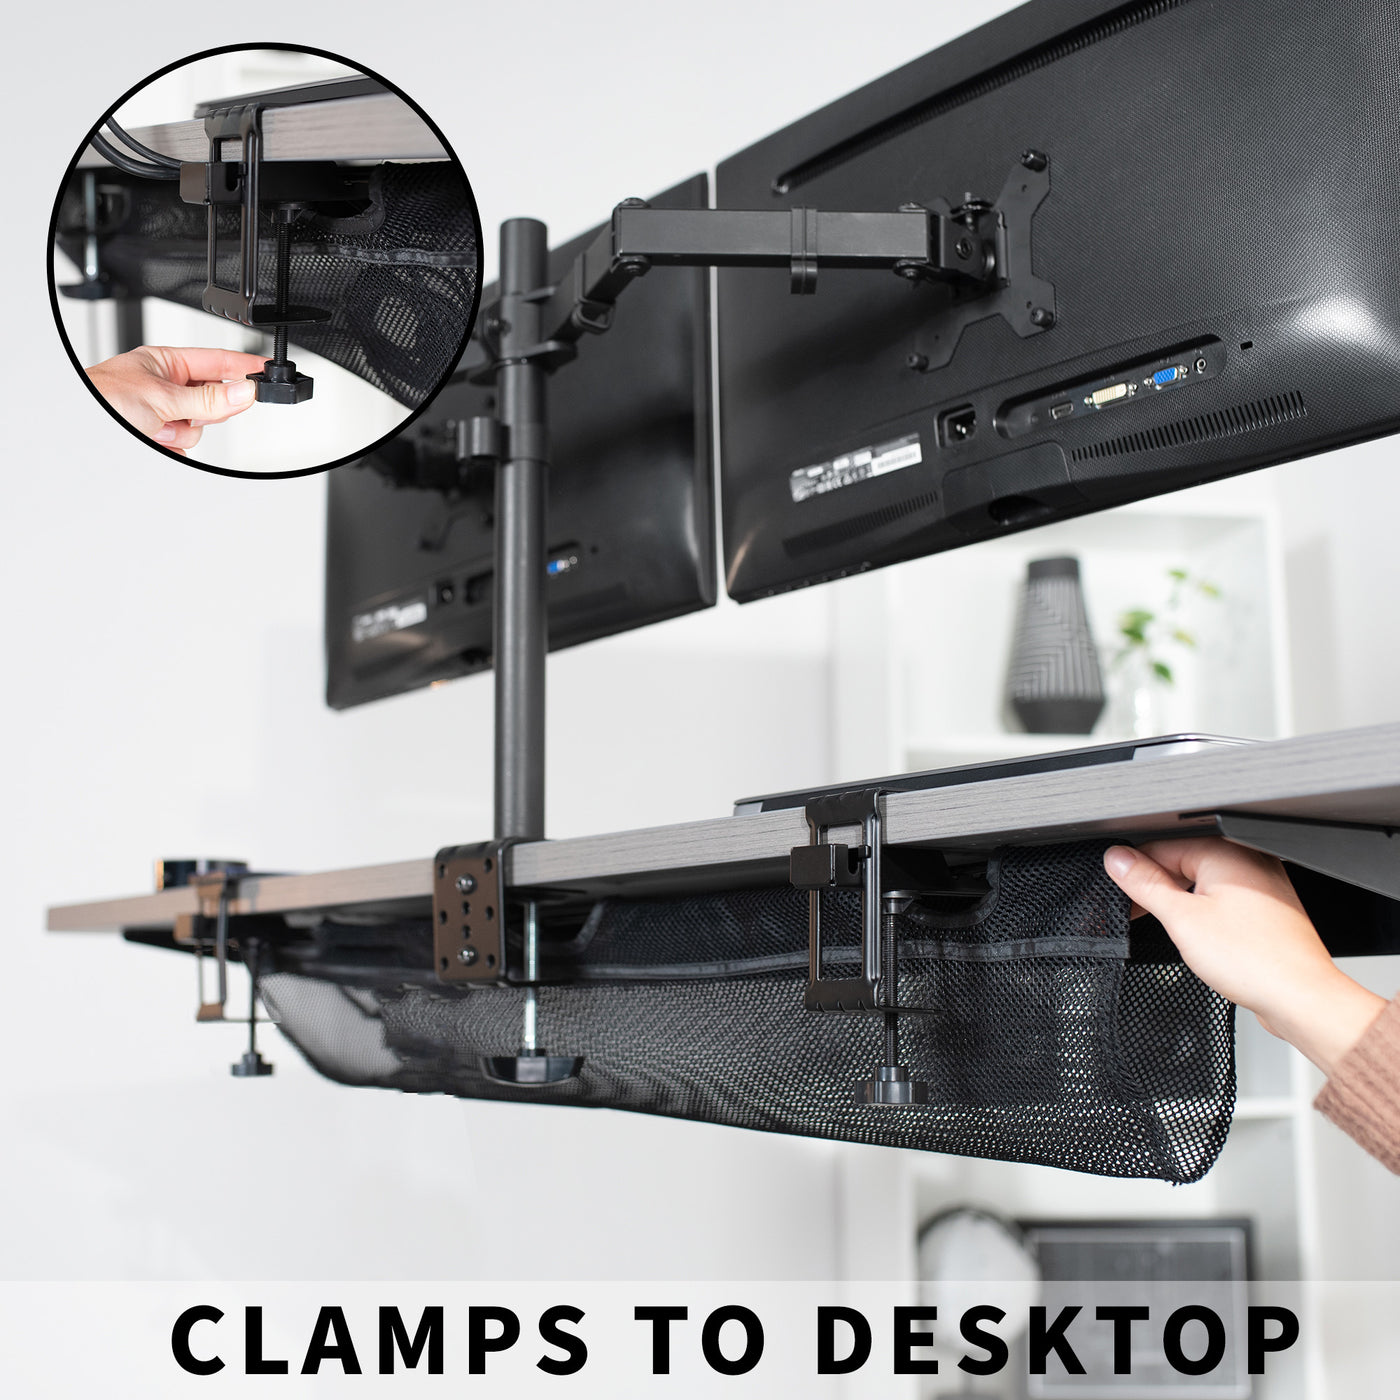 Easy installment that clamps to the desktop to manage cables in no time.